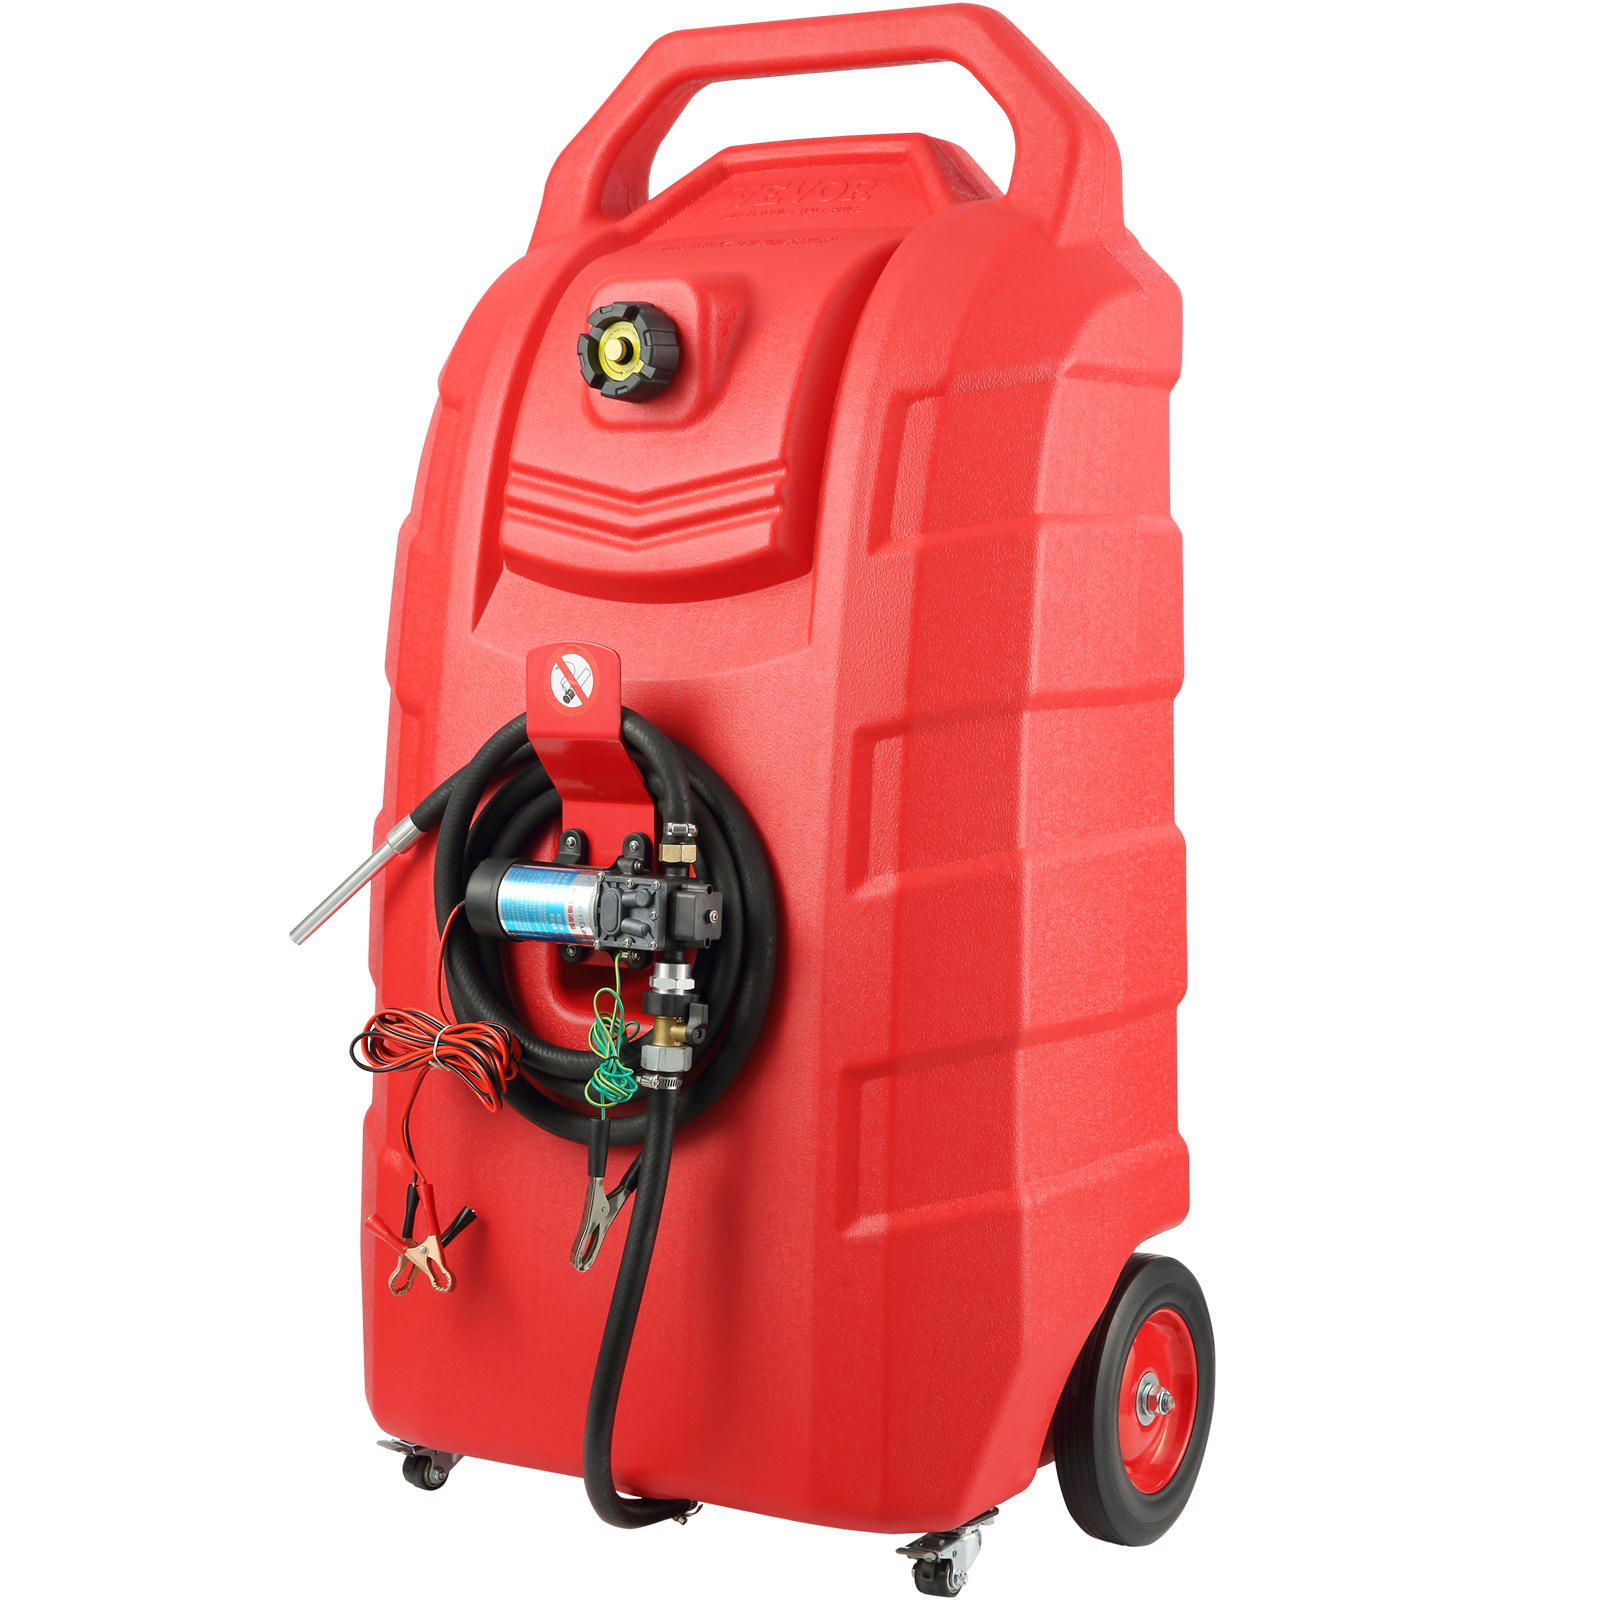 VEVOR Fuel Caddy 32 Gallon Portable Fuel Storage Tank On-Wheels with 12V DC 140 W Transfer Pump (FOR Diesel Only) Diesel Fuel Container with 13 ft